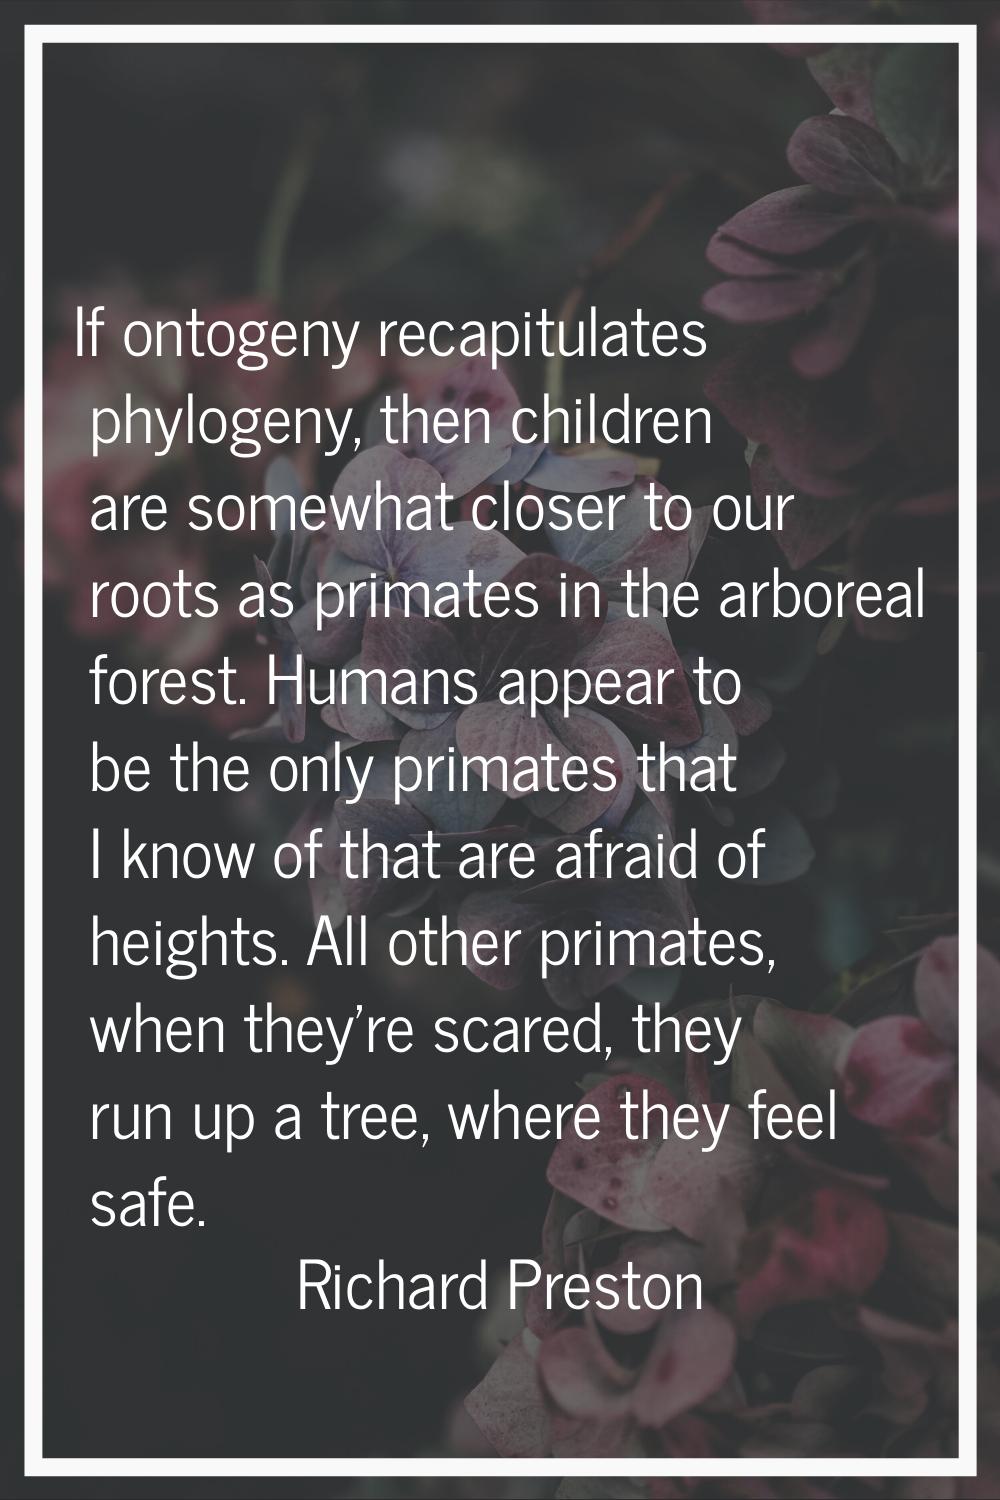 If ontogeny recapitulates phylogeny, then children are somewhat closer to our roots as primates in 